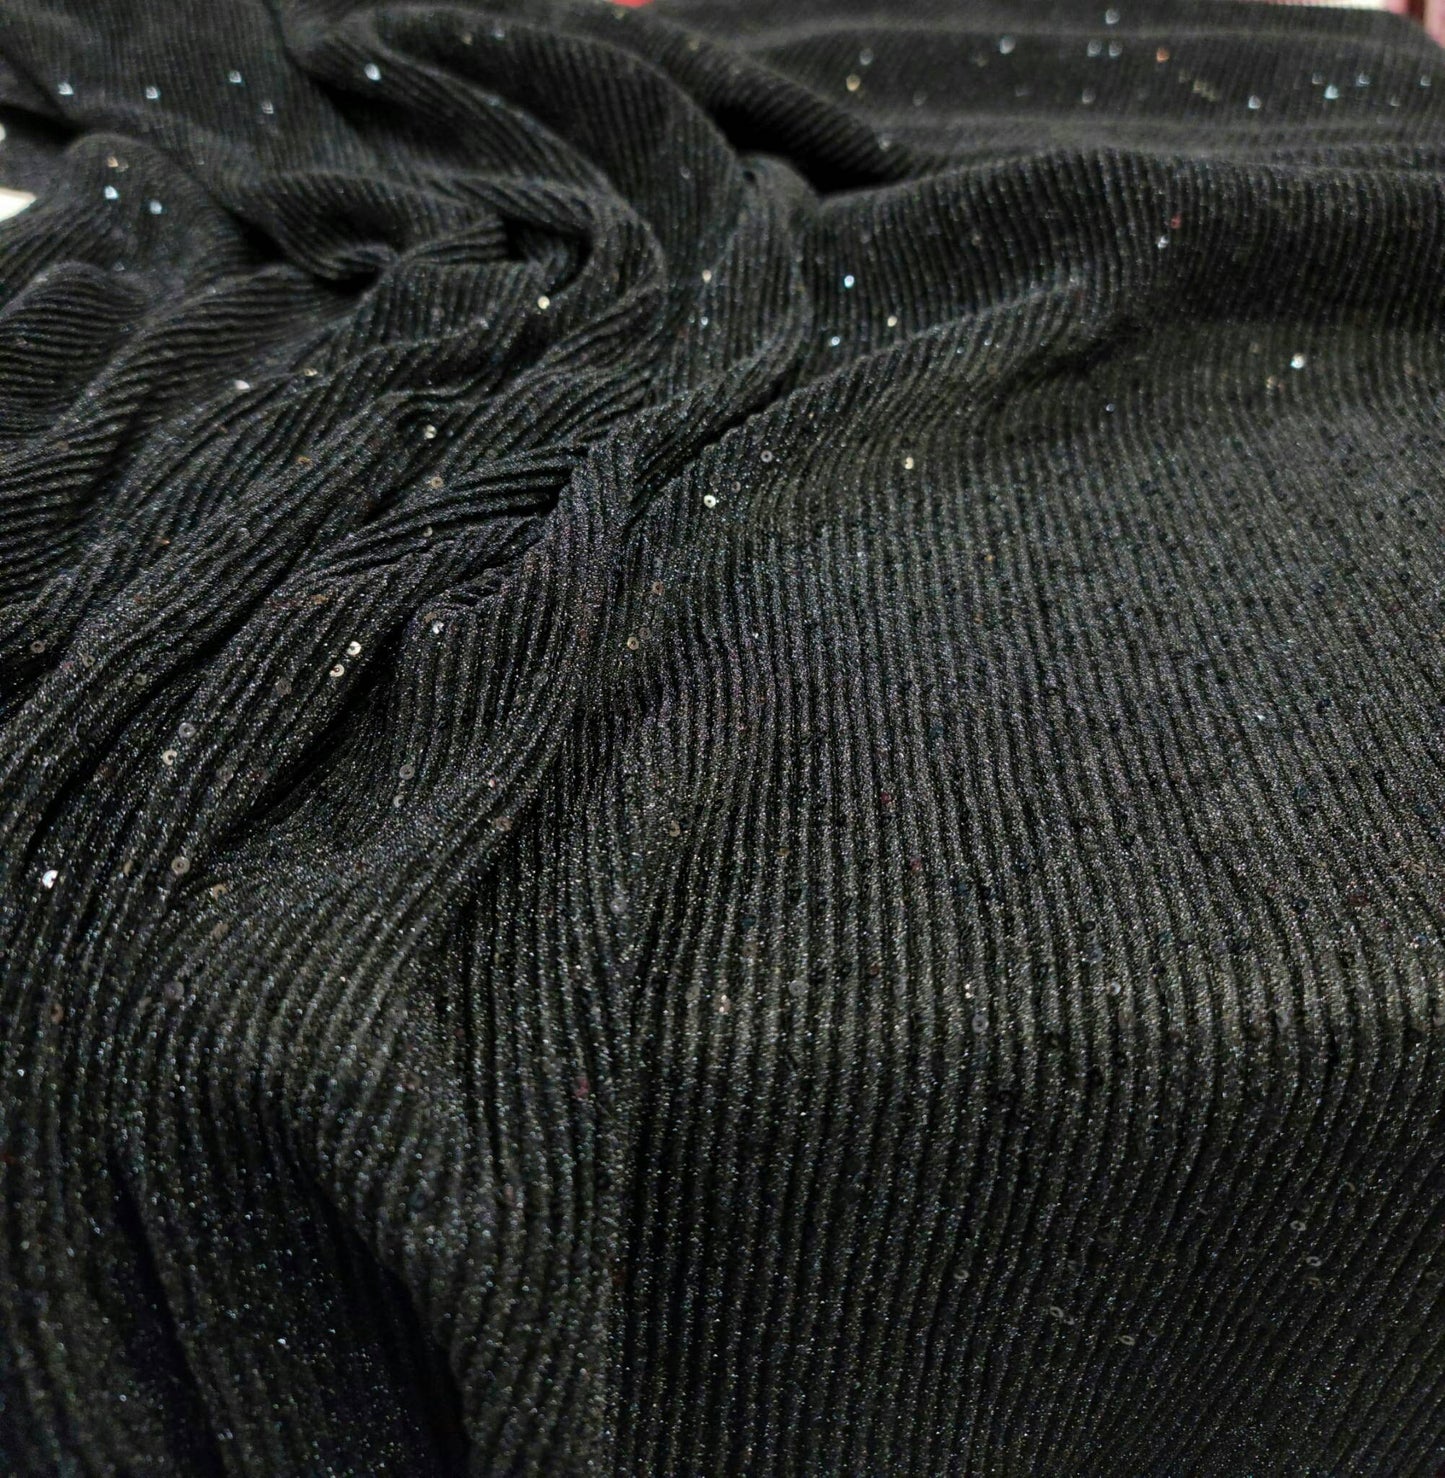 Black Textured Pleated Sequin Spandex 4 Way Stretch Fabric Sold by the Yard Gown Prom Dress Decoration Clothing Soft Knit Fashion Fabric